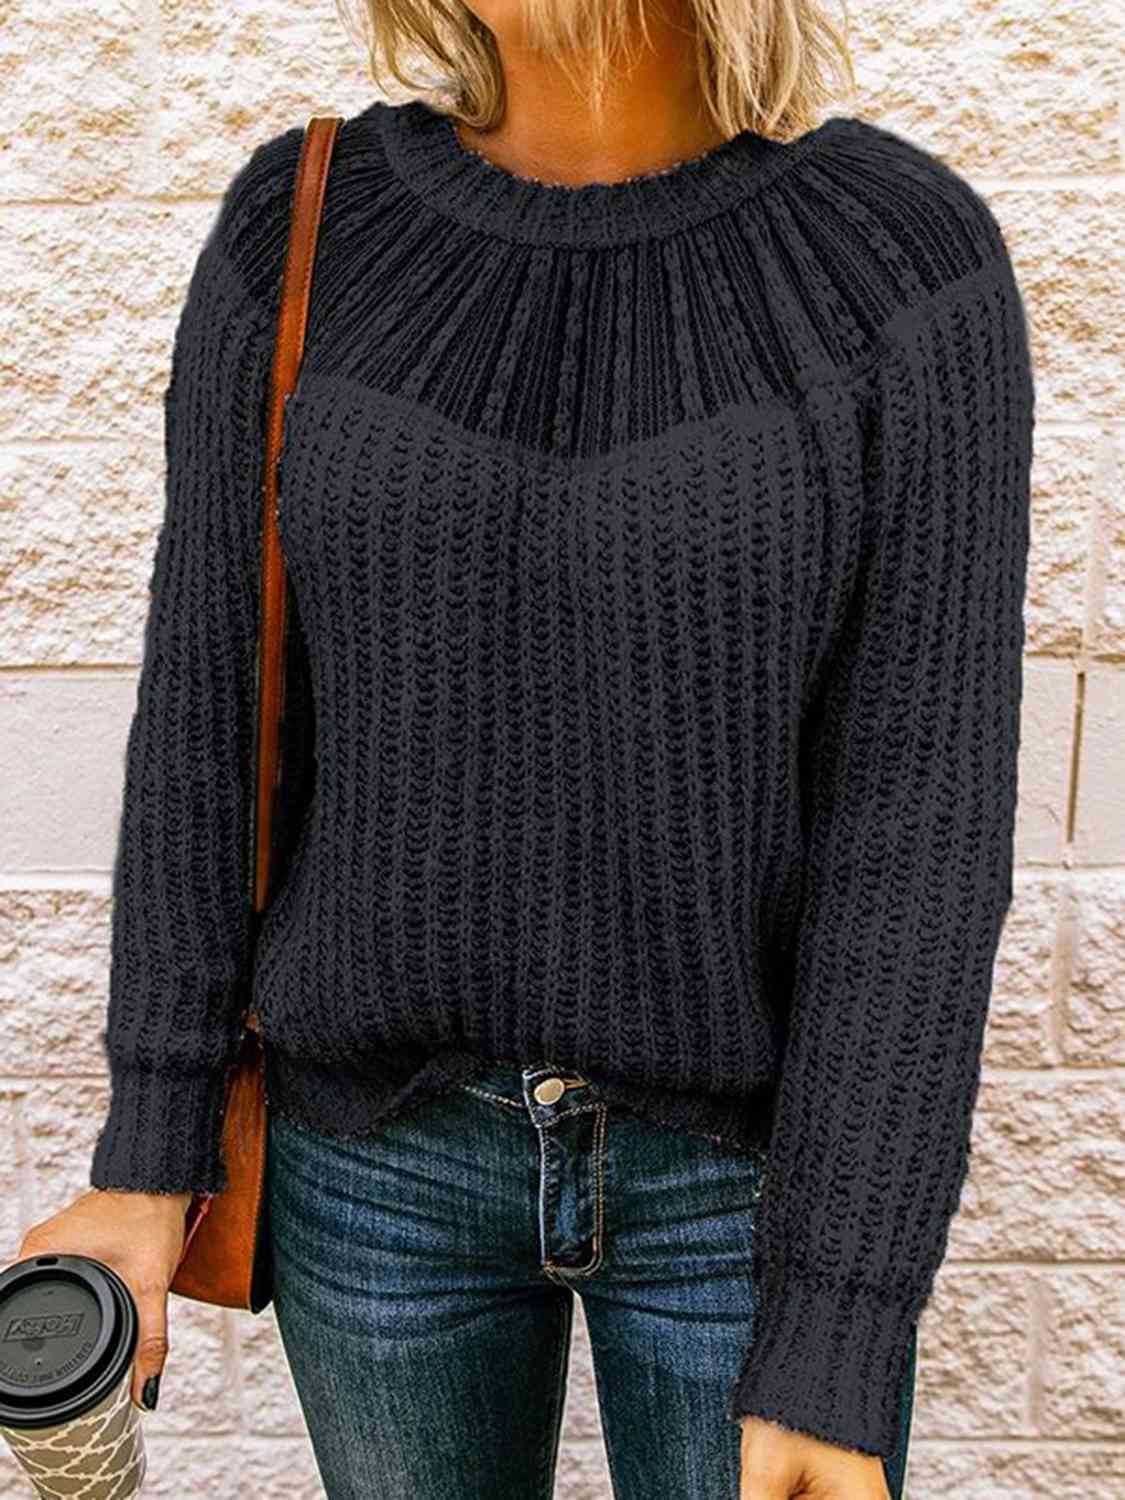 Lauryn Round Neck Rib-Knit Sweater- 1 size Small/Black left! FINAL SALE!